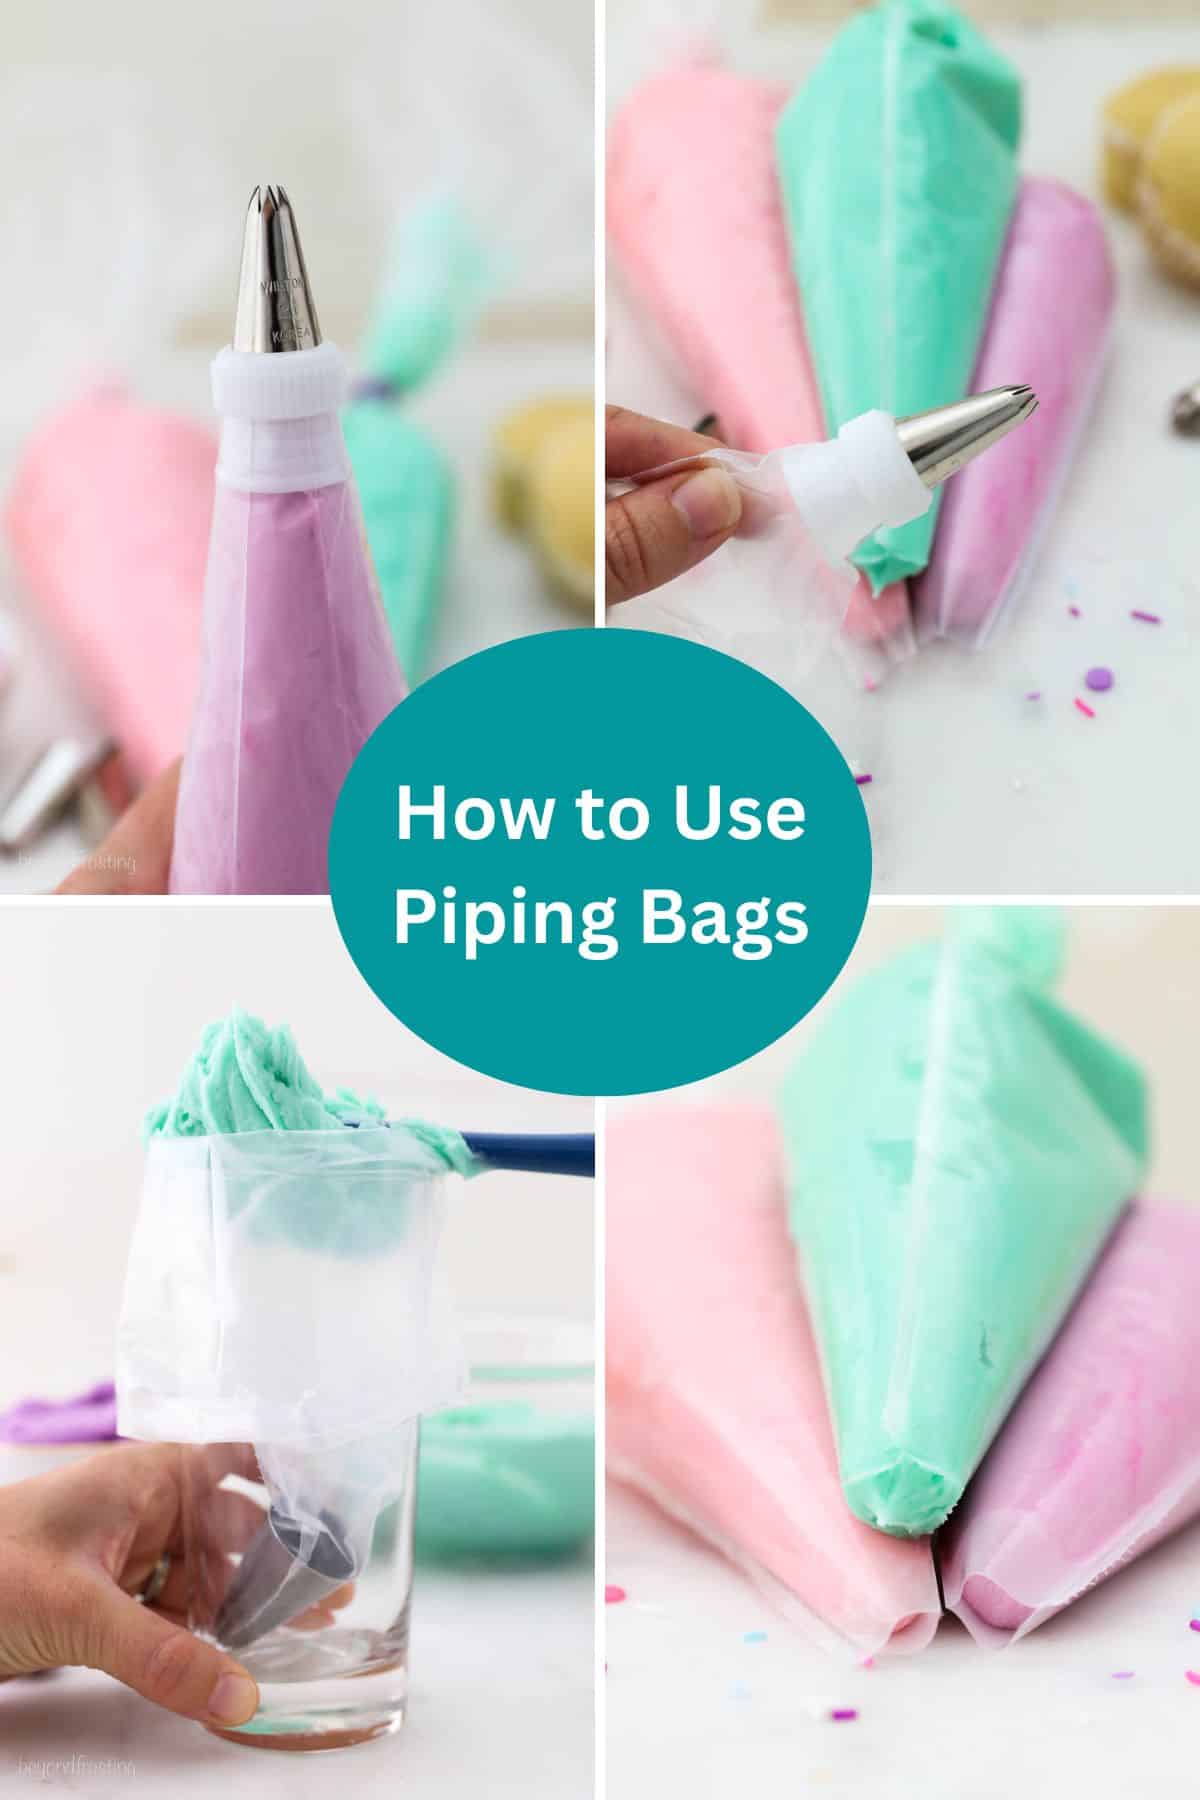 Collage images of assembling a piping bag with piping tips, and text overlay